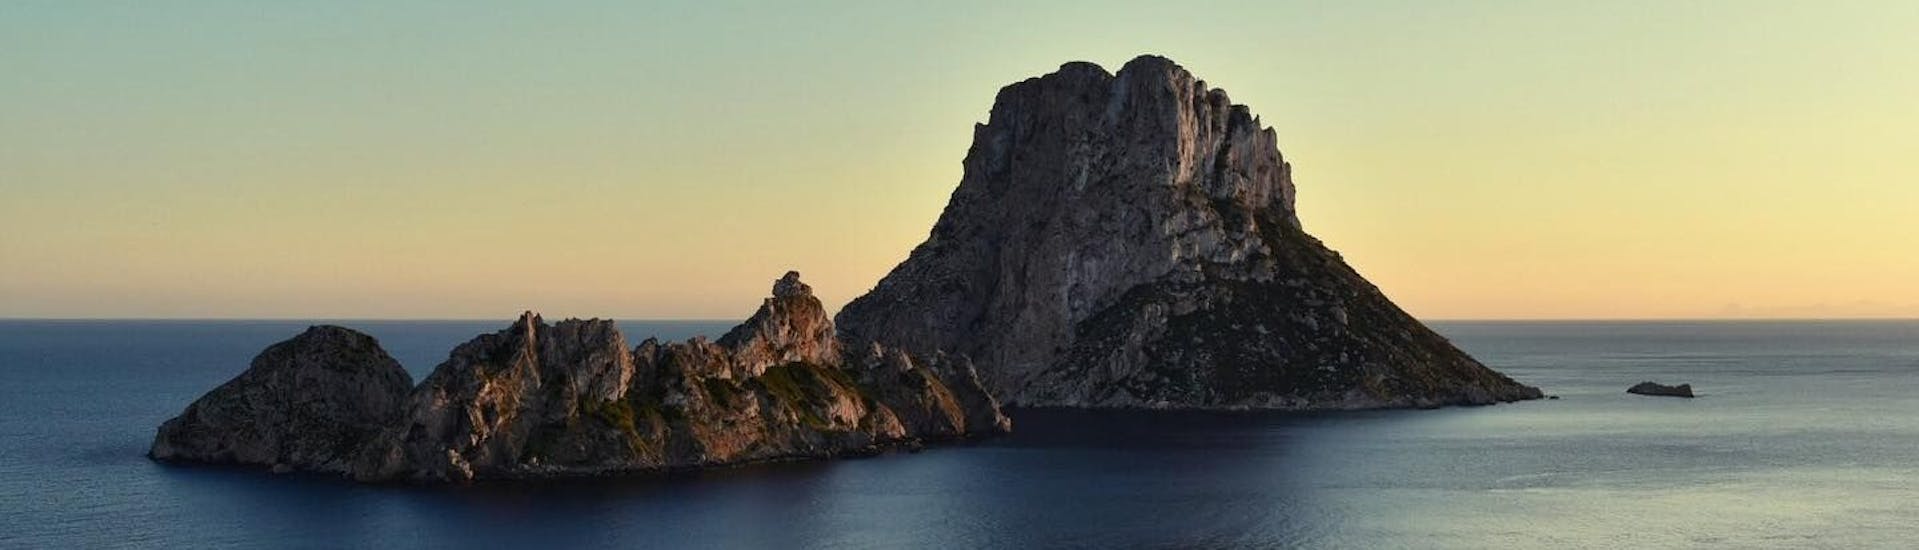 Es Vedra, a highlight you can see during your Full Day Boat trip from Sant Antoni de Portmany to Es Vedrá & Formentera with Paella & Sunset with Excursiones Ibiza.